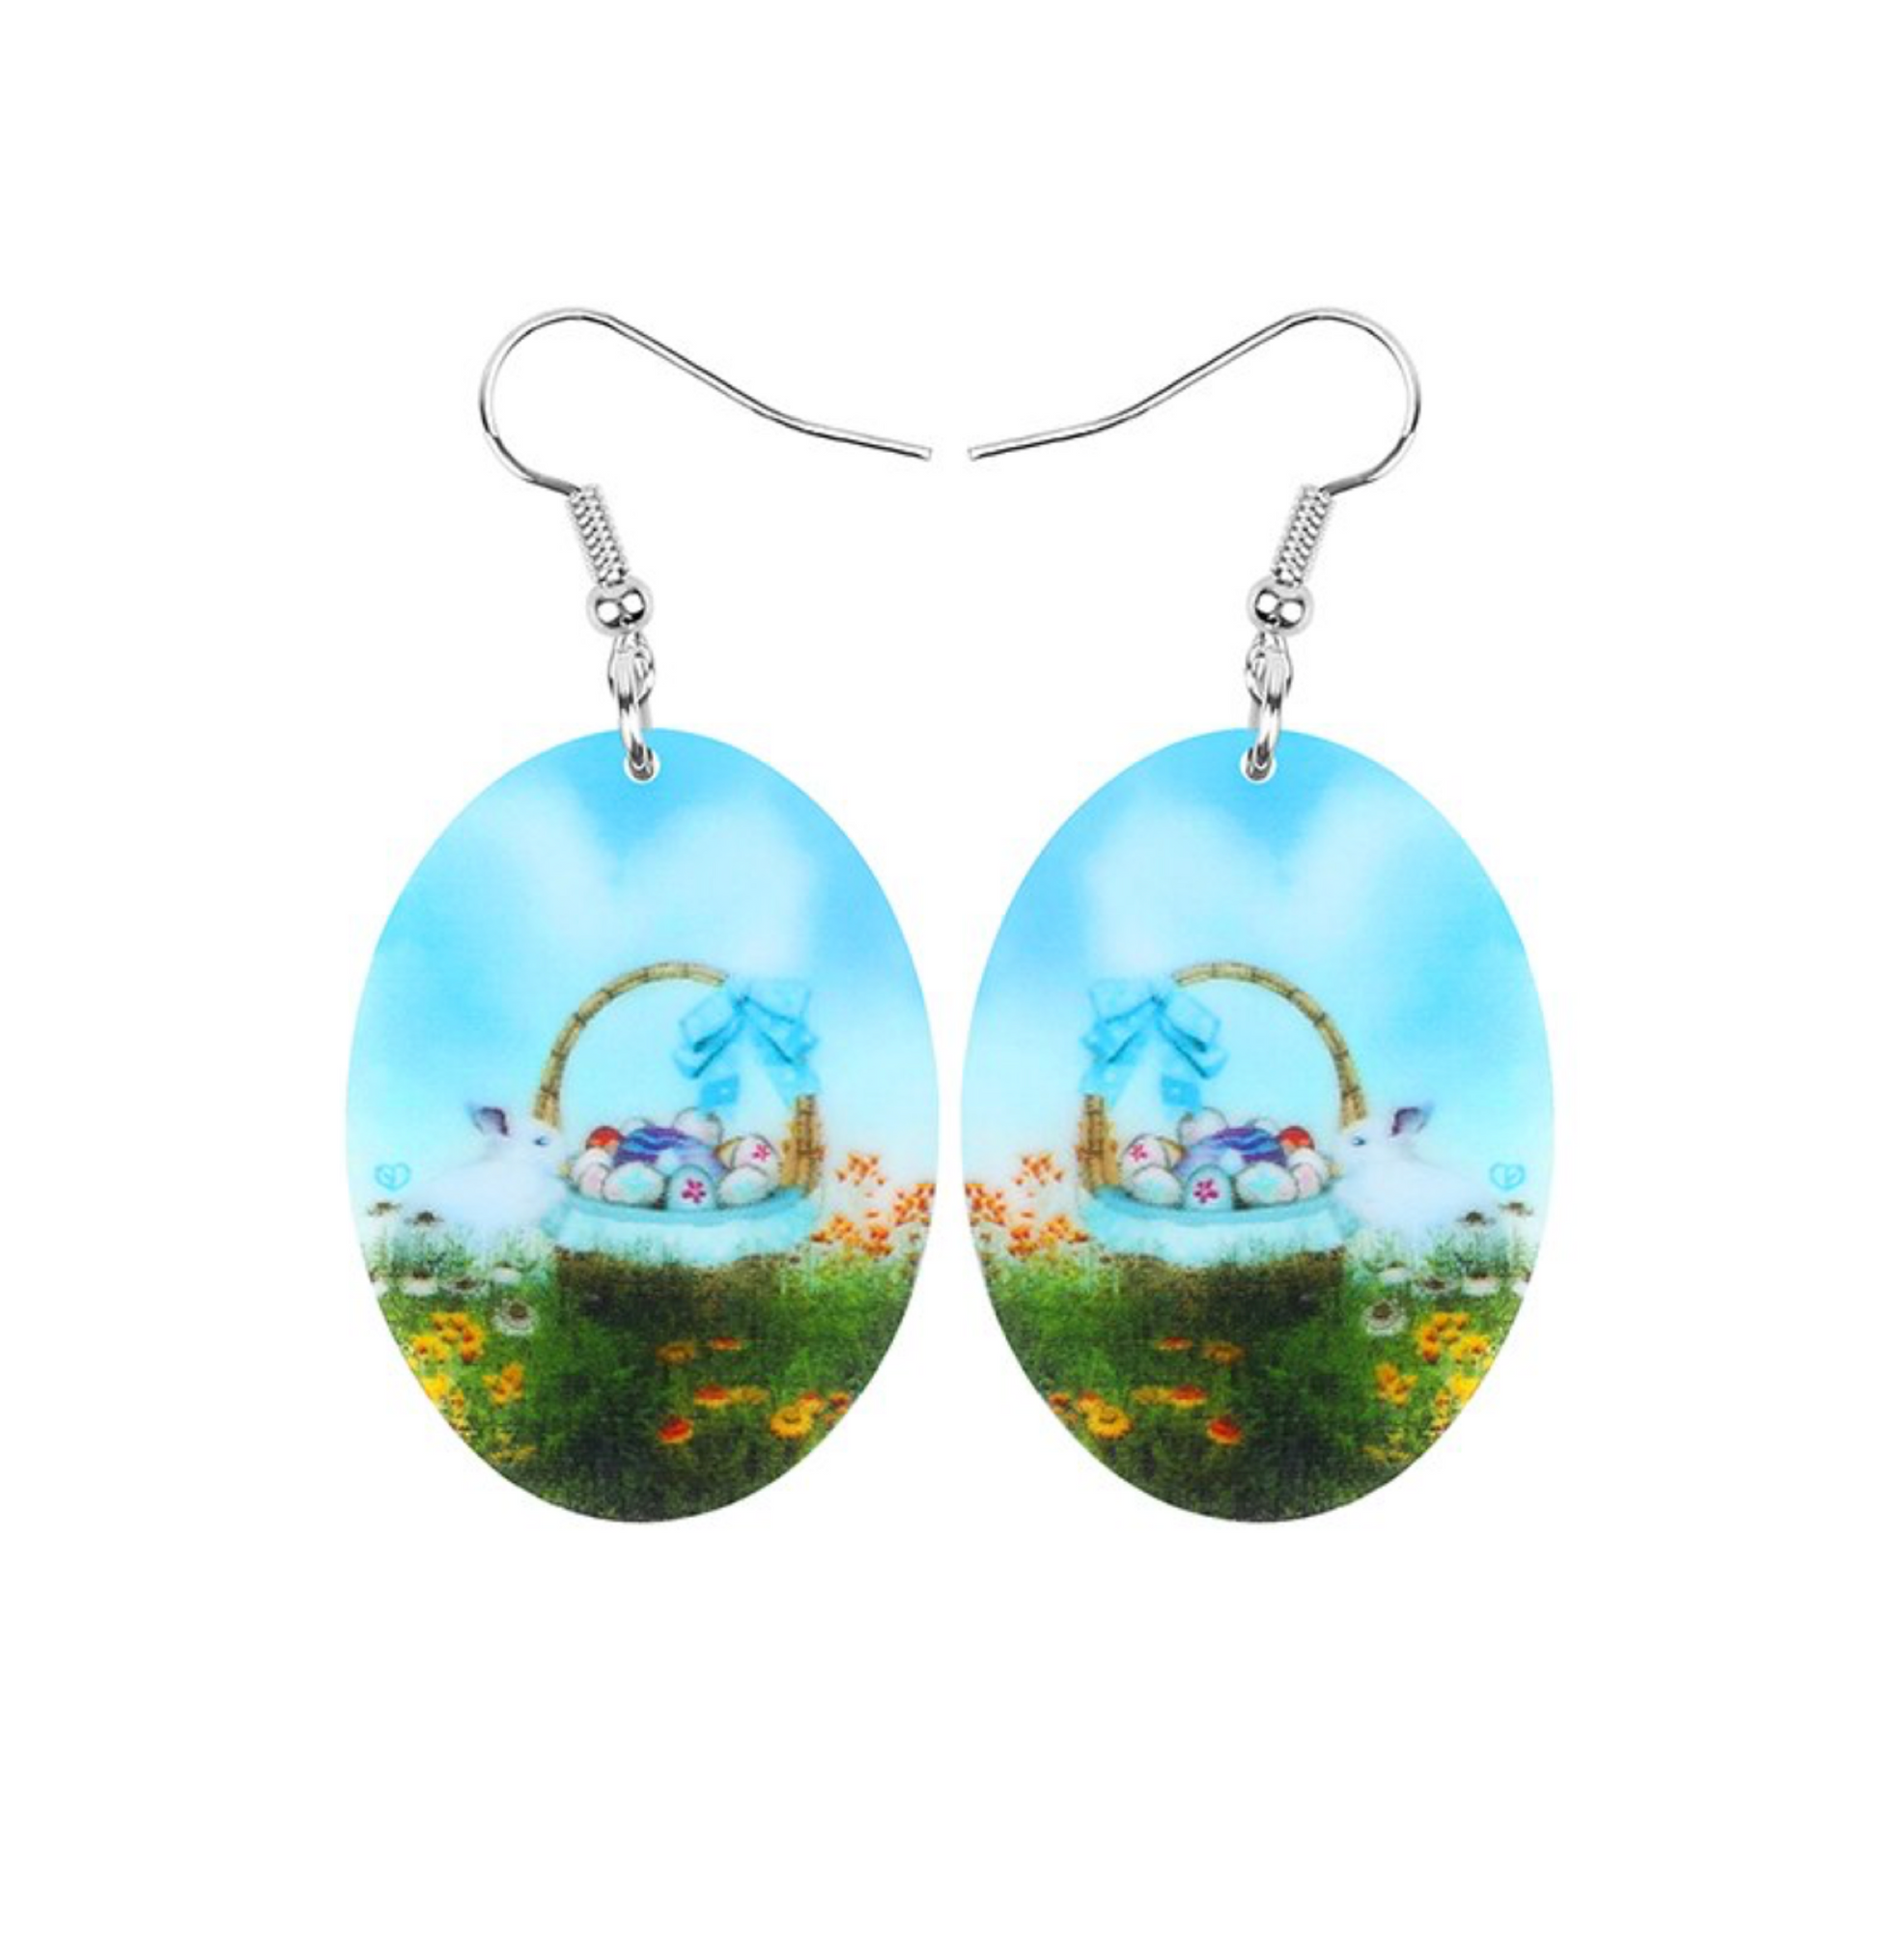 Blue Oval Earrings With Bunny Easter Egg Basket